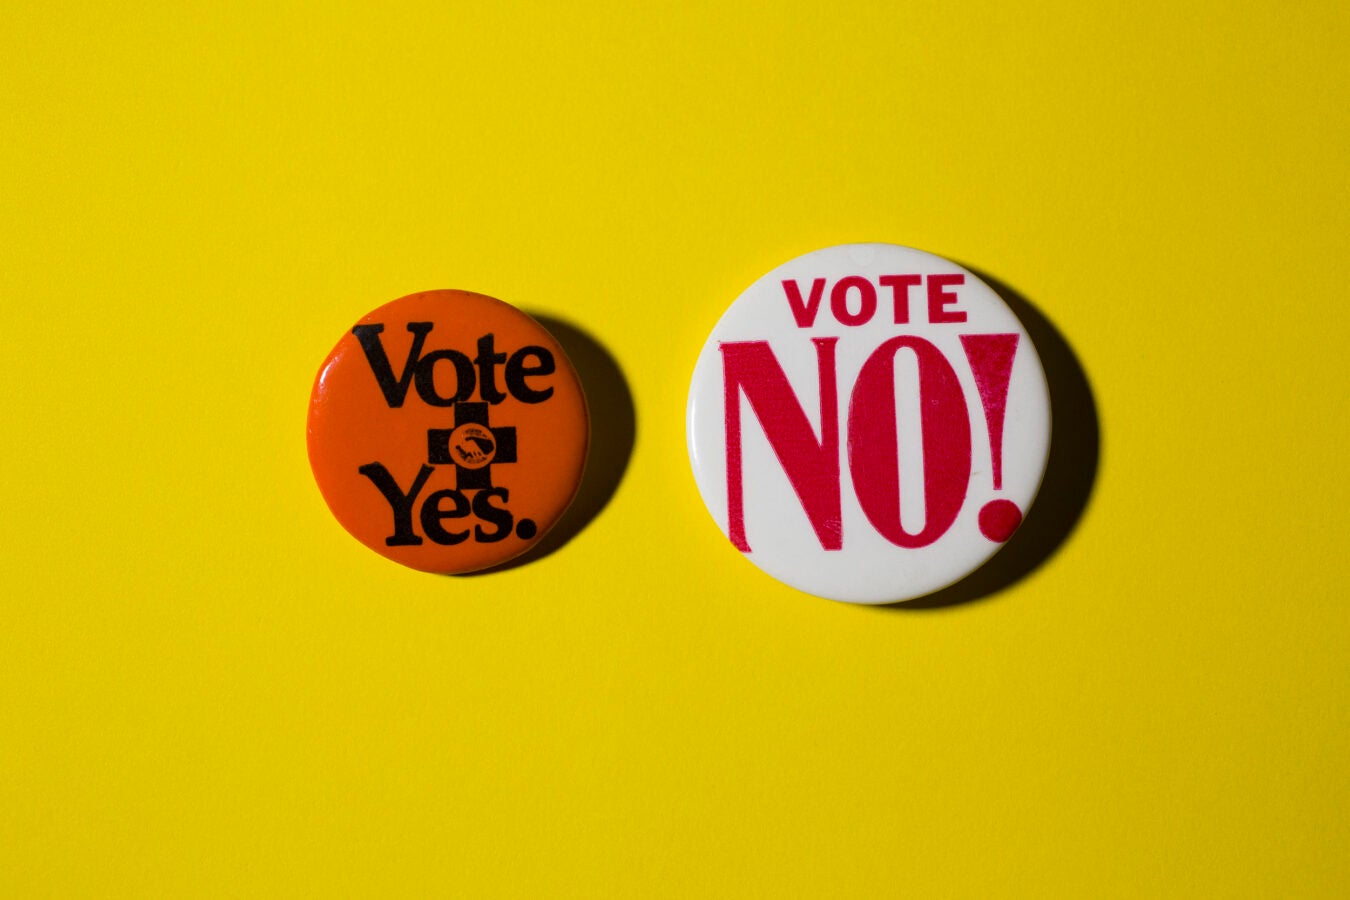 Buttons for and against ballot initiatives.